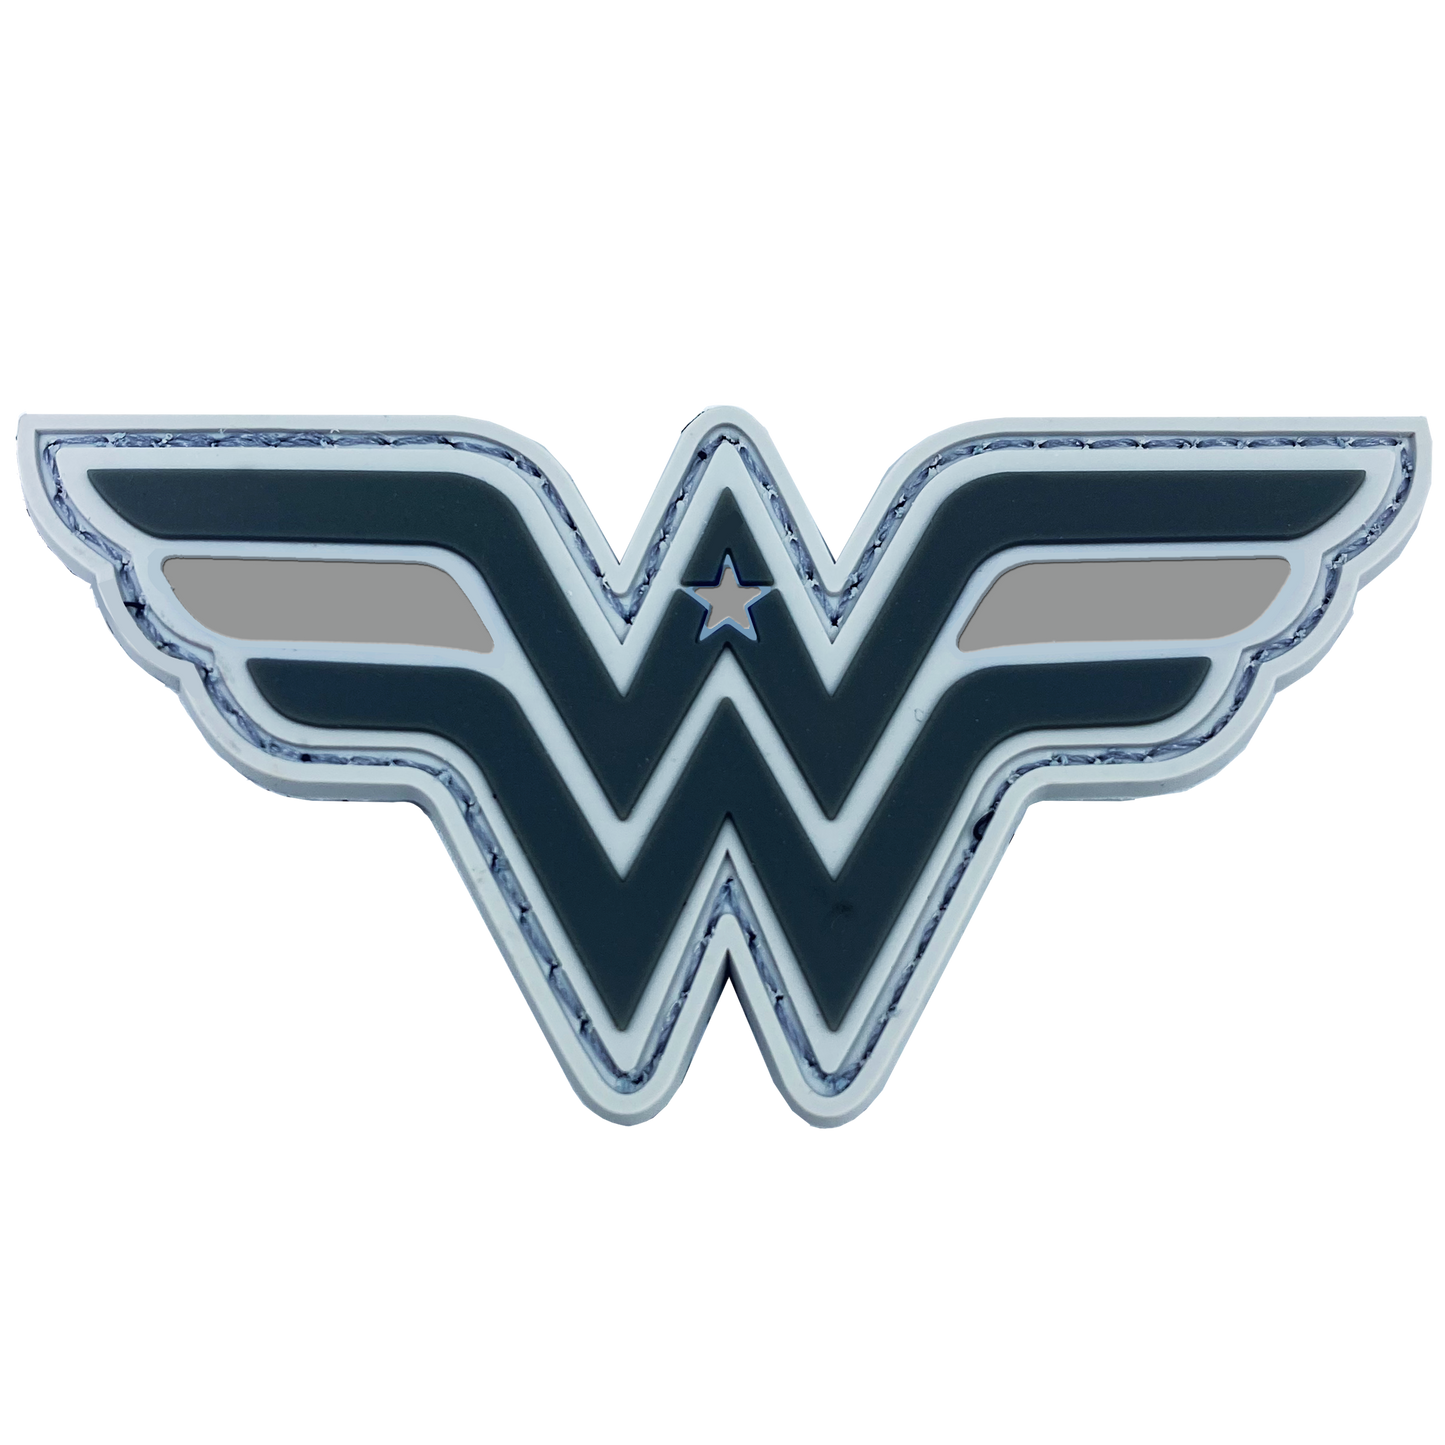 DL6-09 Wonder Woman inspired Women in Law Enforcement Thin Gray Line Corrections Correctional Officer CO Patch hook and loop back PVC